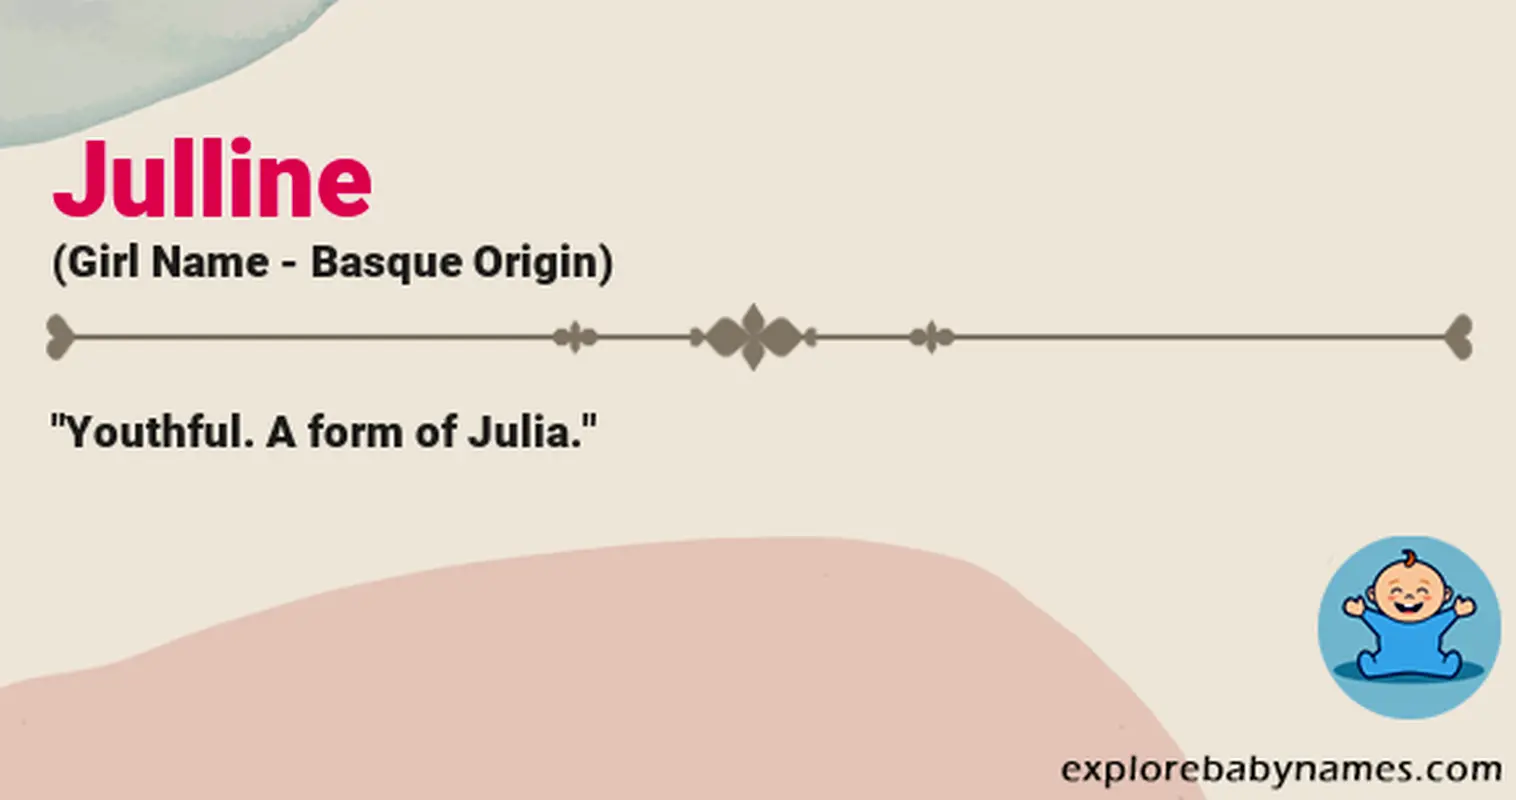 Meaning of Julline